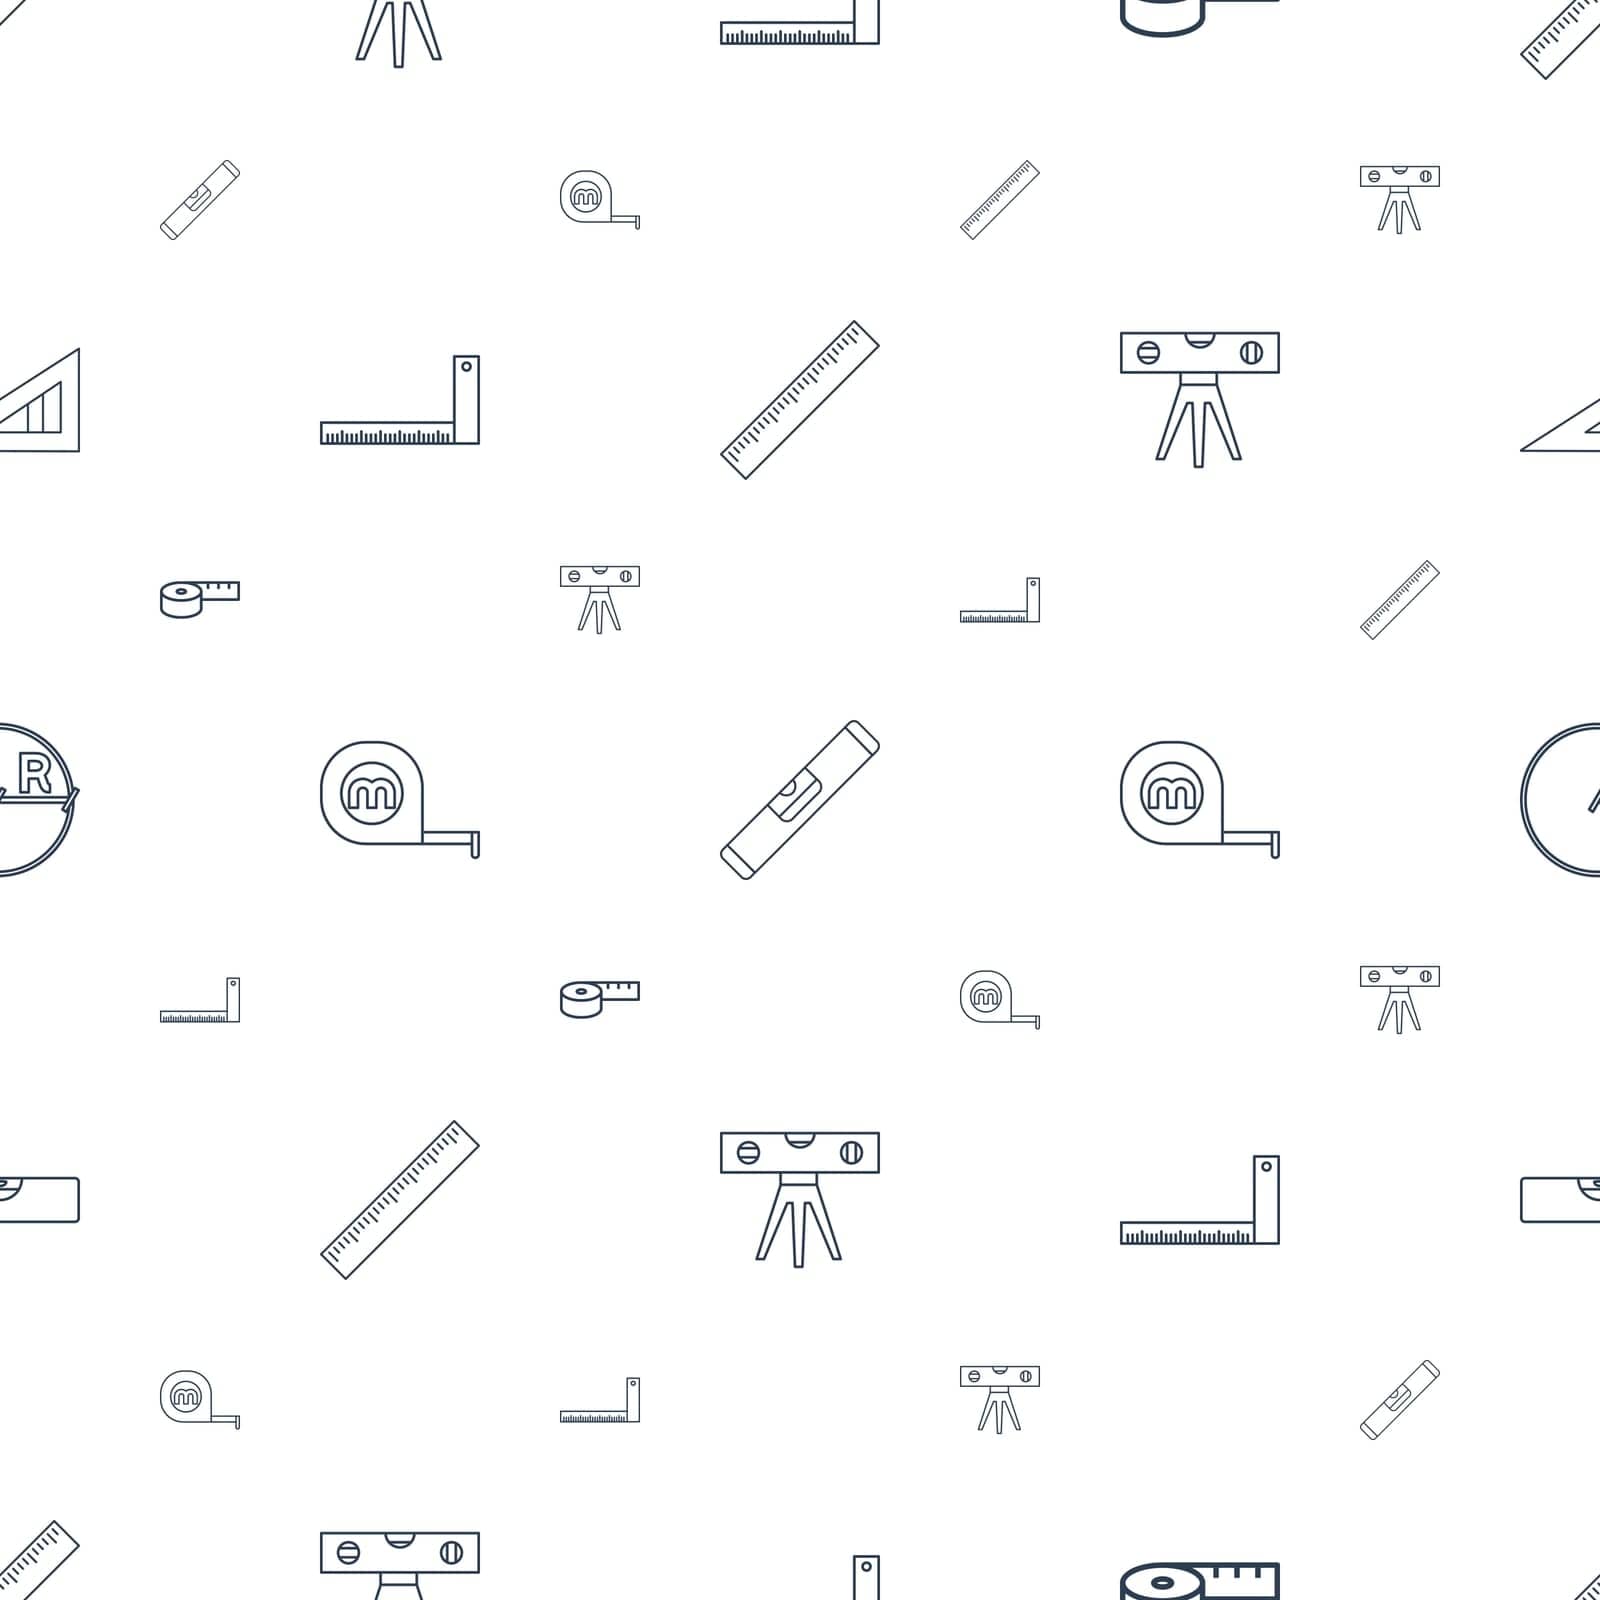 symbol,repair,measuring,education,line,concept,pattern,icon,sign,isolated,simple,instrument,industry,ruler,triangle,measurement,horizontal,white,tape,balance,school,web,design,drawing,construction,vector,element,level,work,length,equipment,tool,measure,background,geometric,illustration,circle,object by ogqcorp